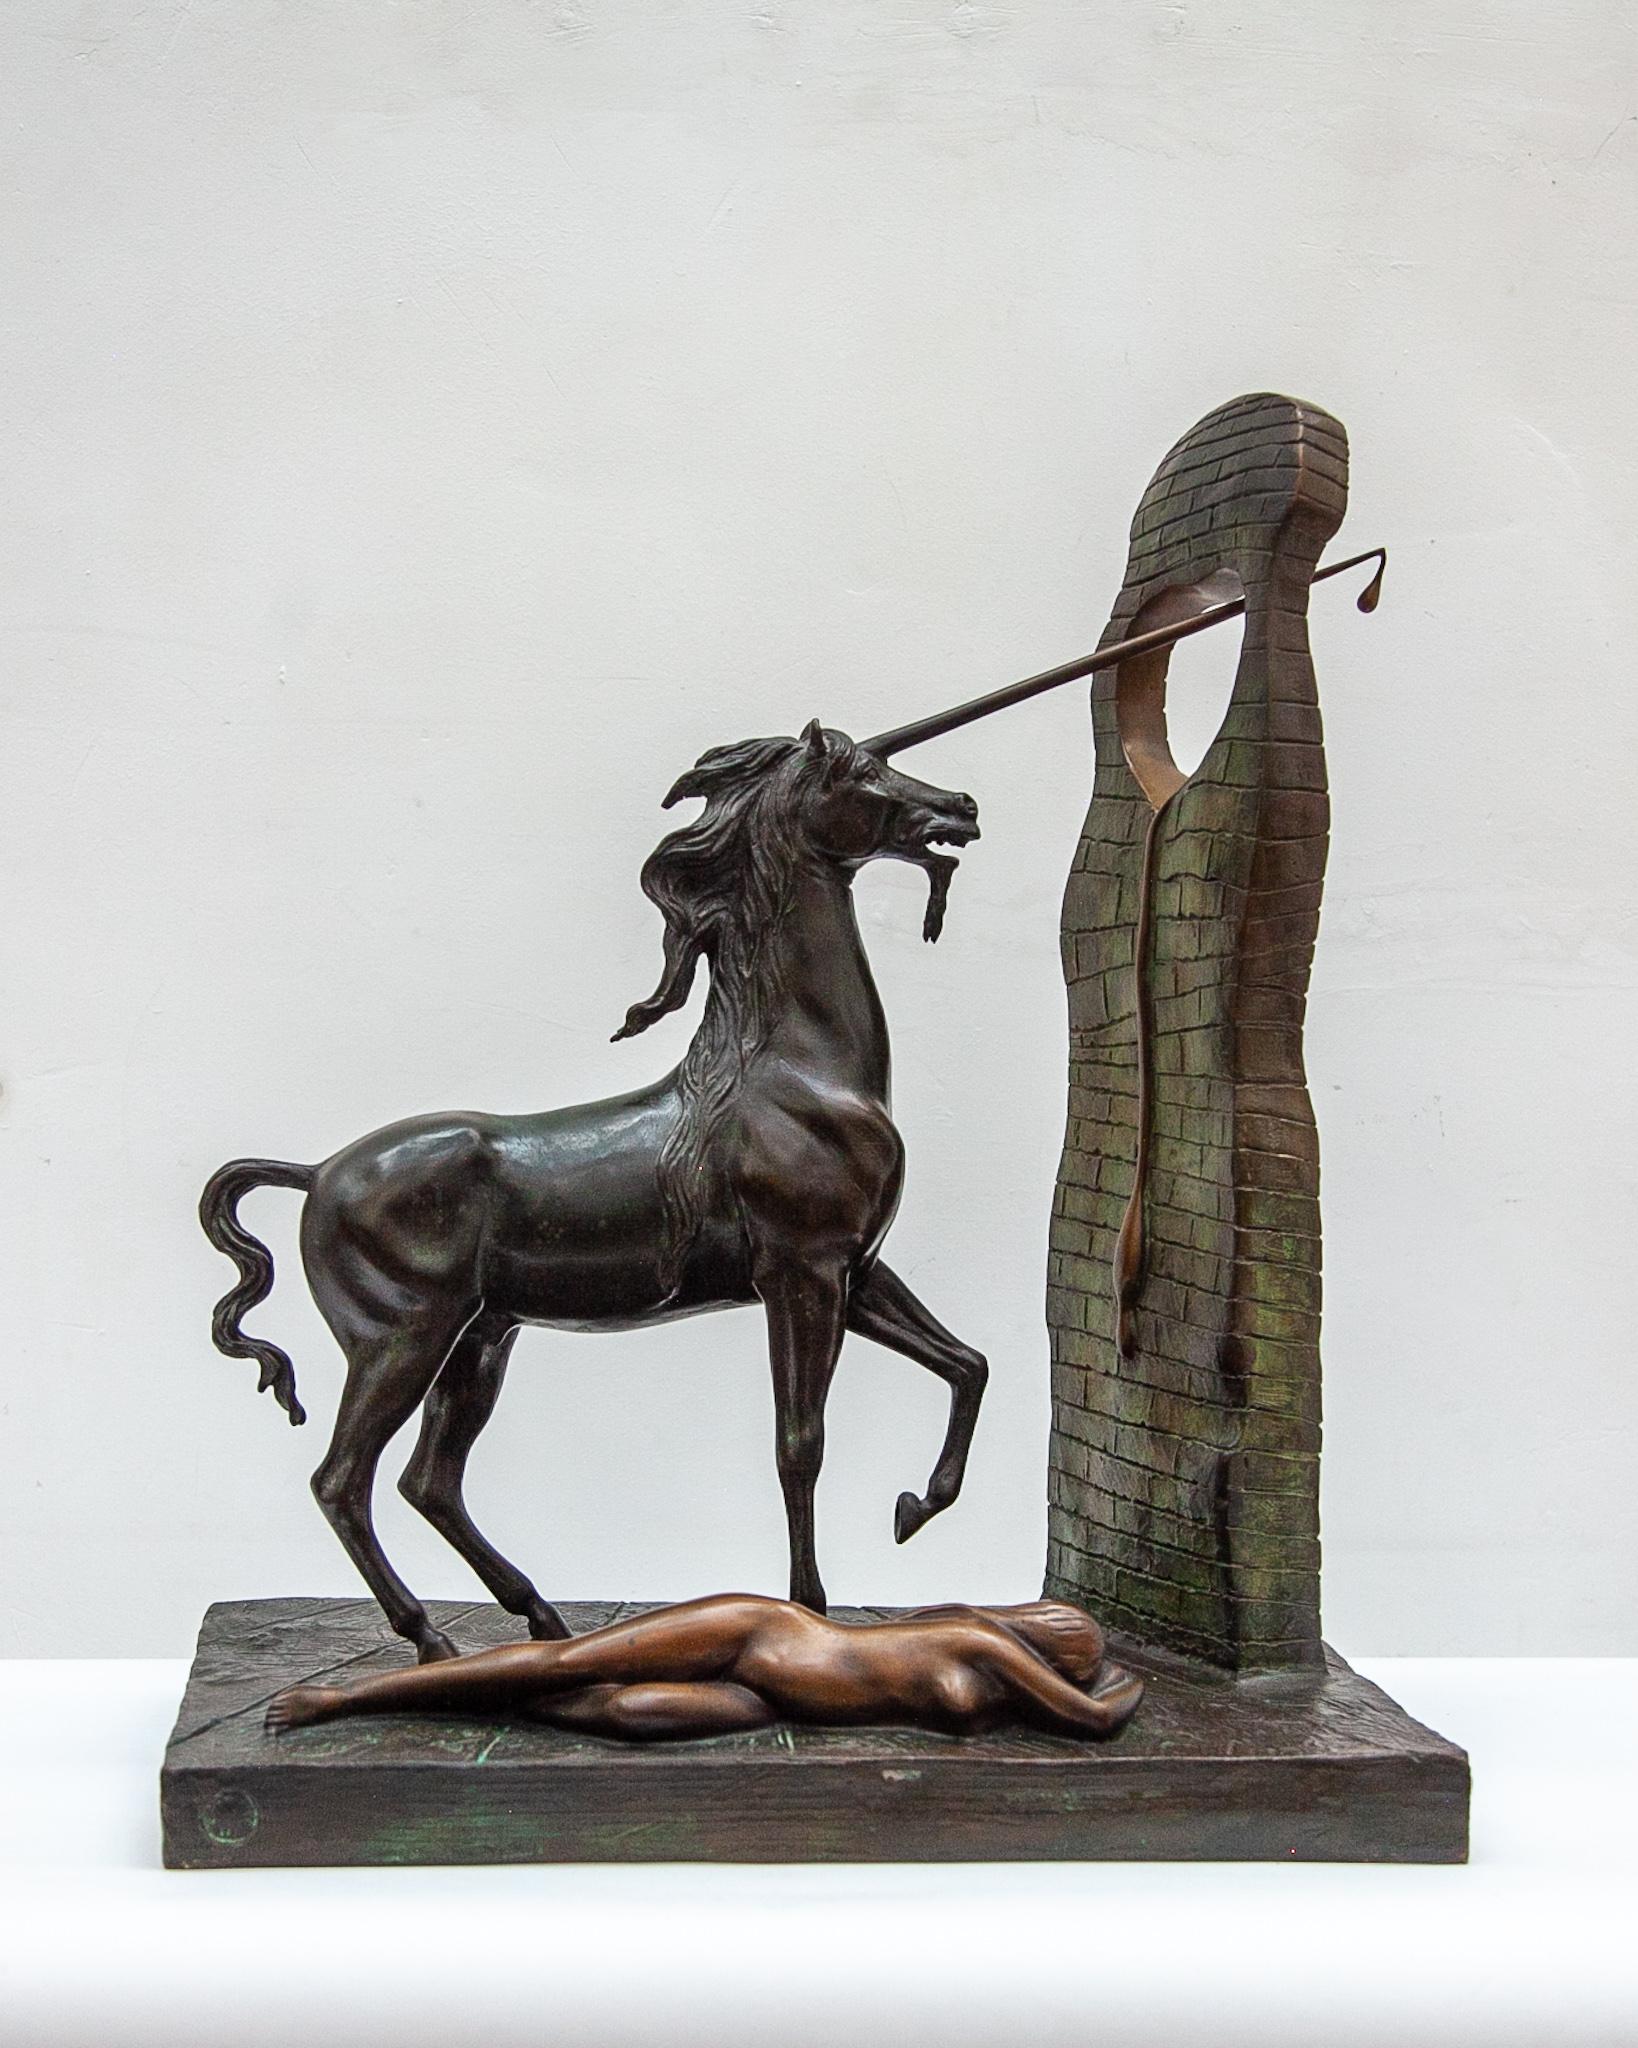 Impressed Surrealist bronze sculpture by Salvador DALI (1904-1989) - Unicorn, 1984 - Bronze signed Dali on the base numbered '70/350' and stamped with the foundry mark Jemelton 1984-Dimensions: 57 x 51 x 32 cm - This edition is based on Salvador